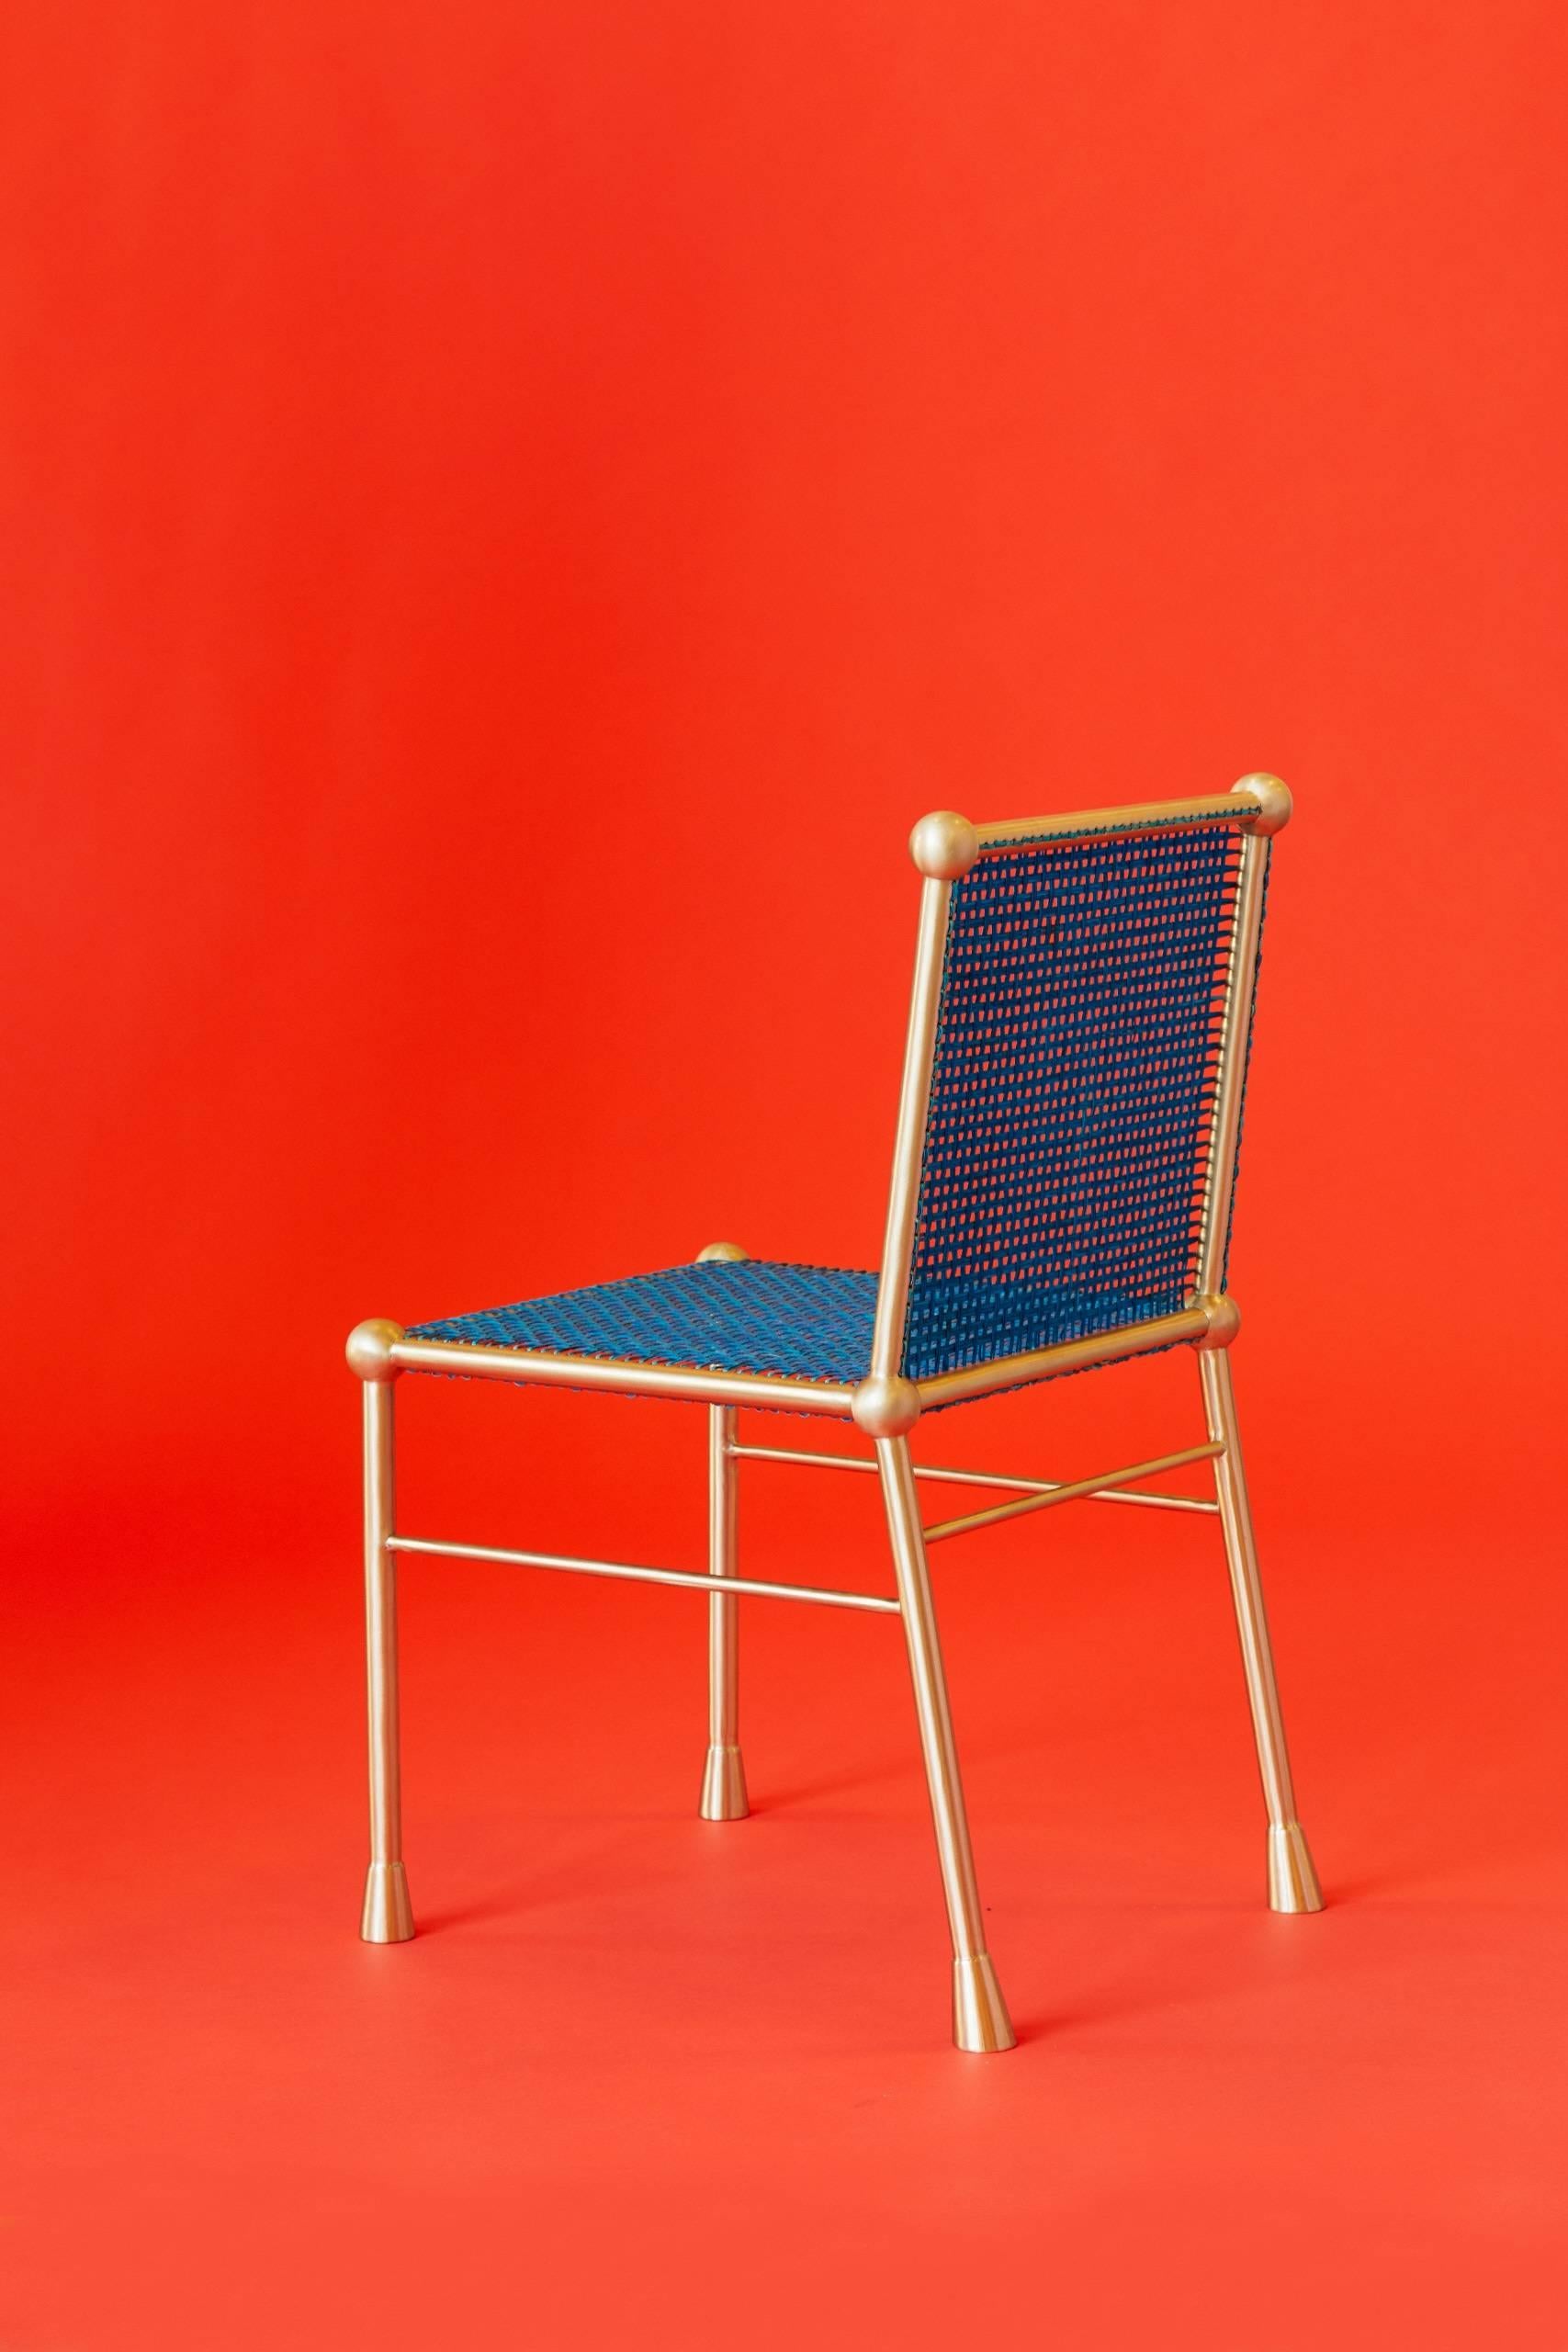 Canadian Solid Brass Chair With Hand Woven Blue Cane For Sale